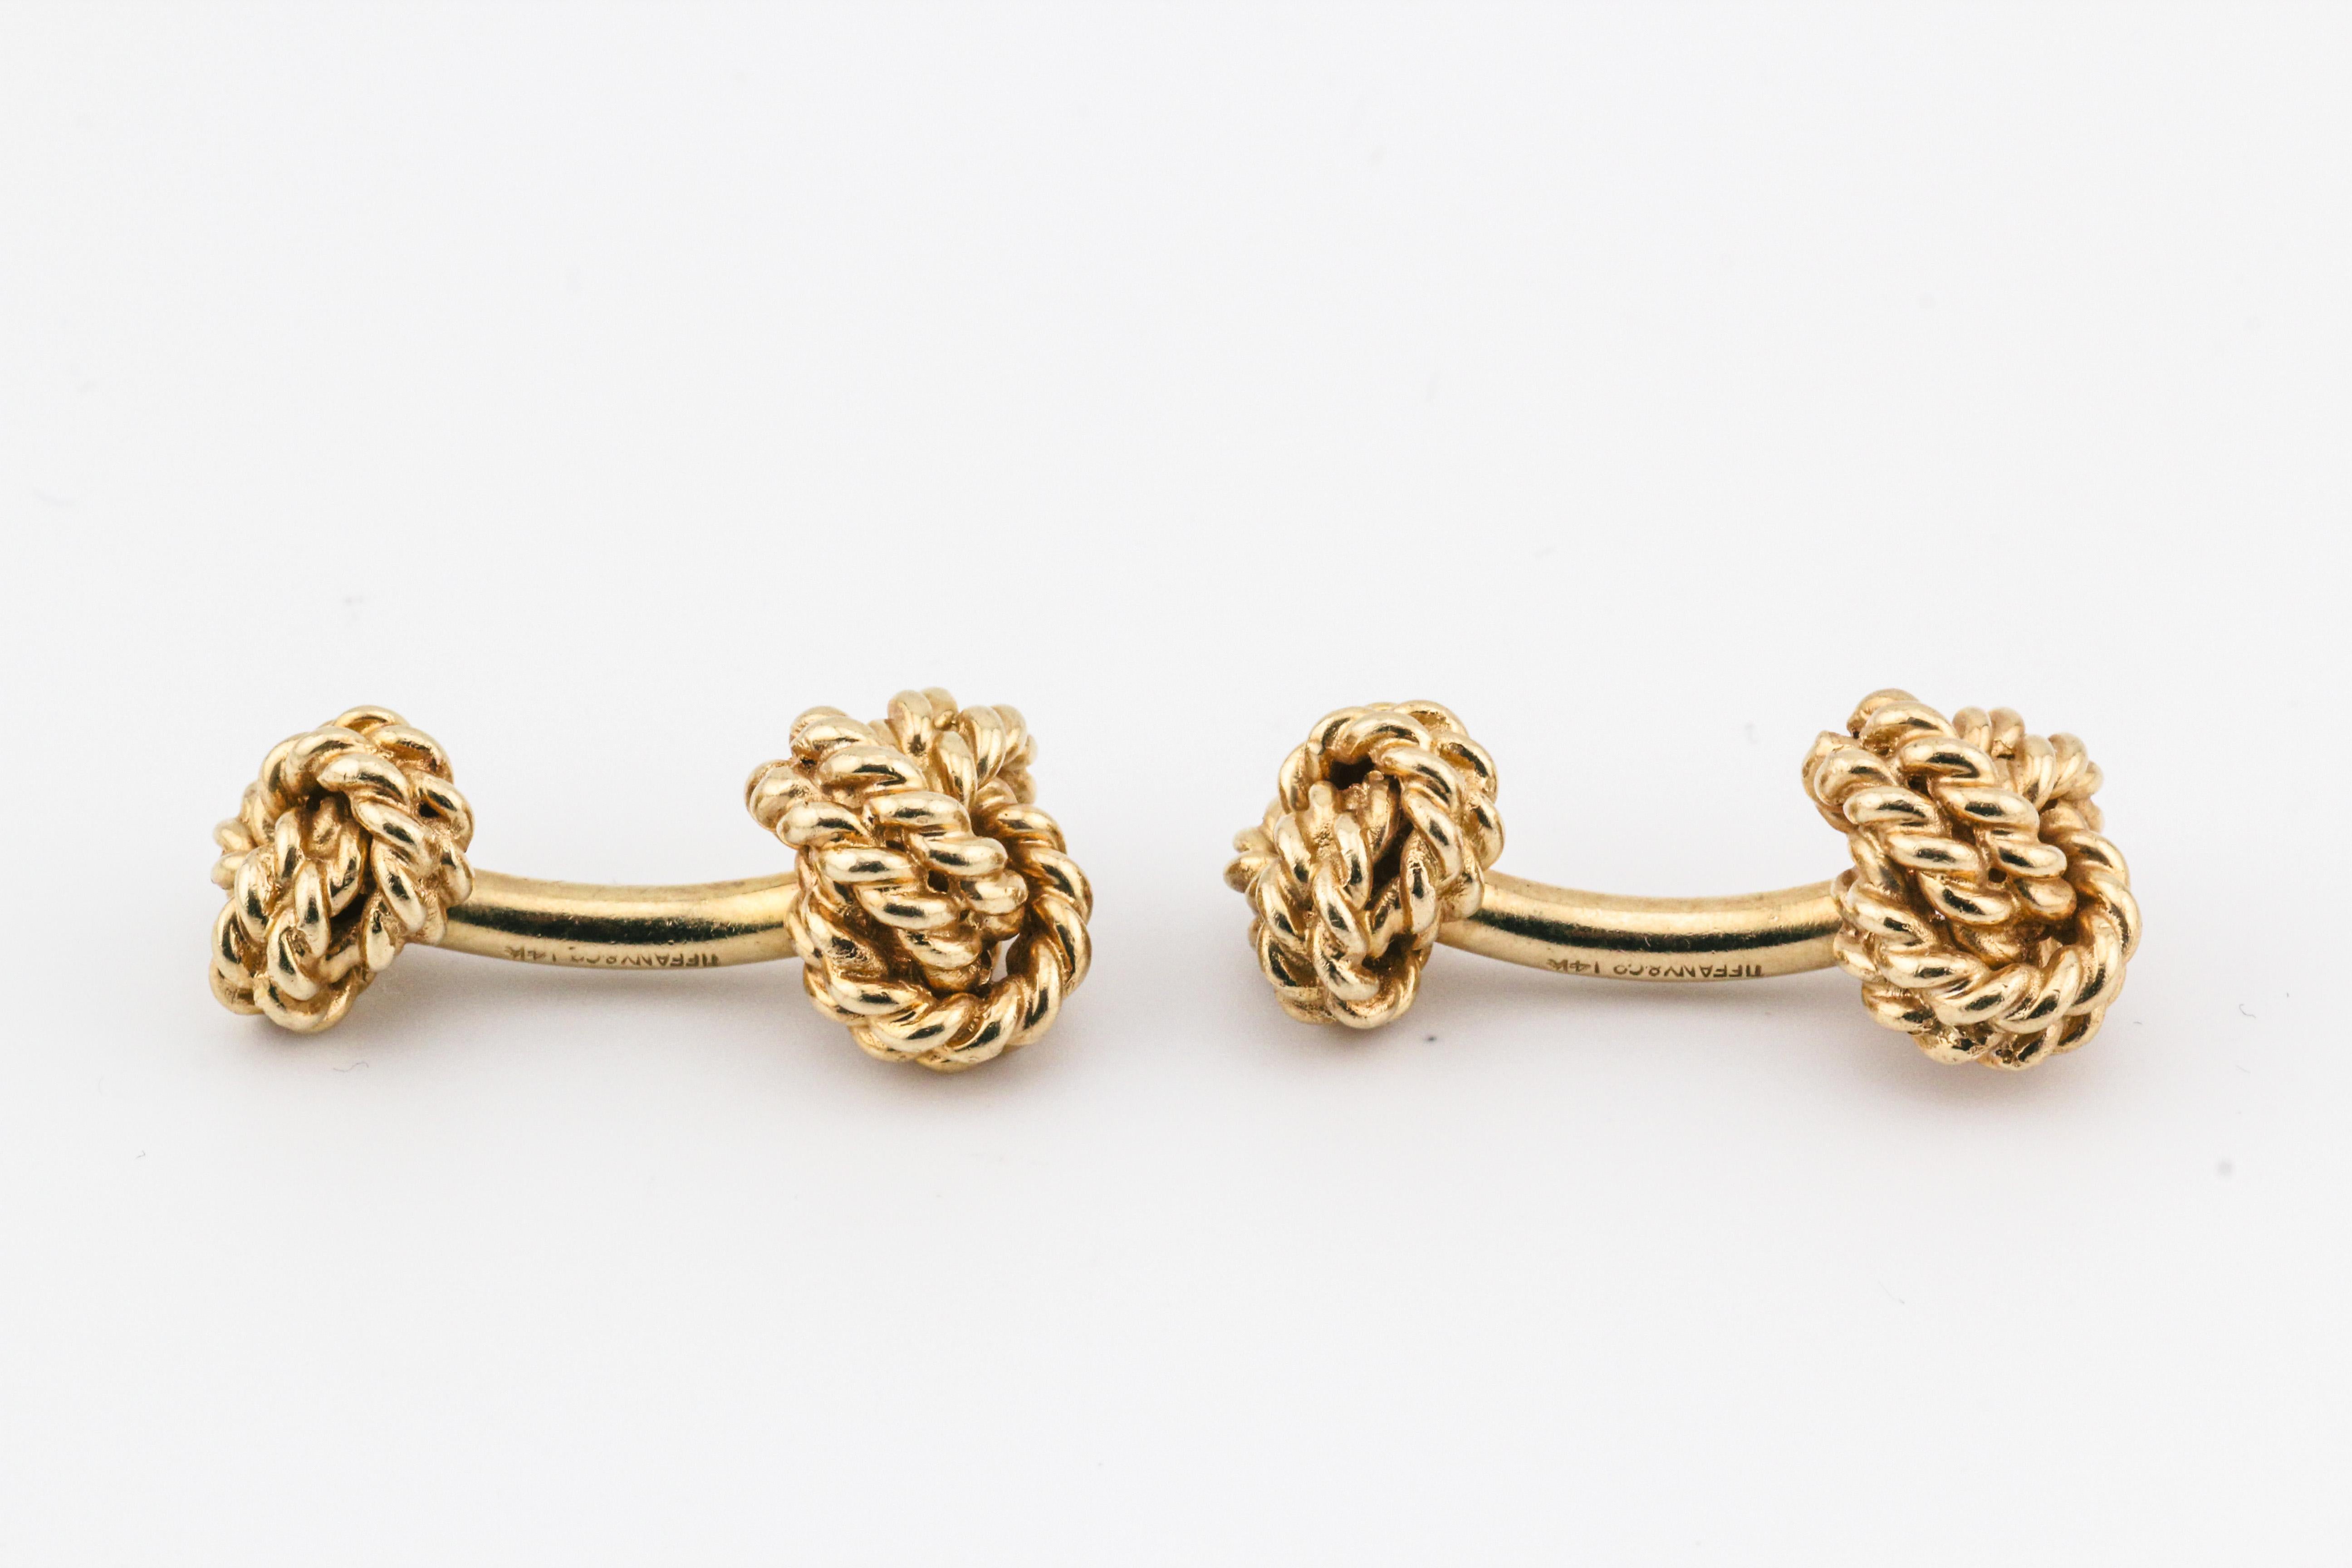 Introducing the Tiffany & Co. 14k Yellow Gold Rope Knot Cufflinks, a symbol of timeless sophistication and understated elegance. Crafted by the renowned luxury brand Tiffany & Co., these cufflinks are a testament to the brand's legacy of quality